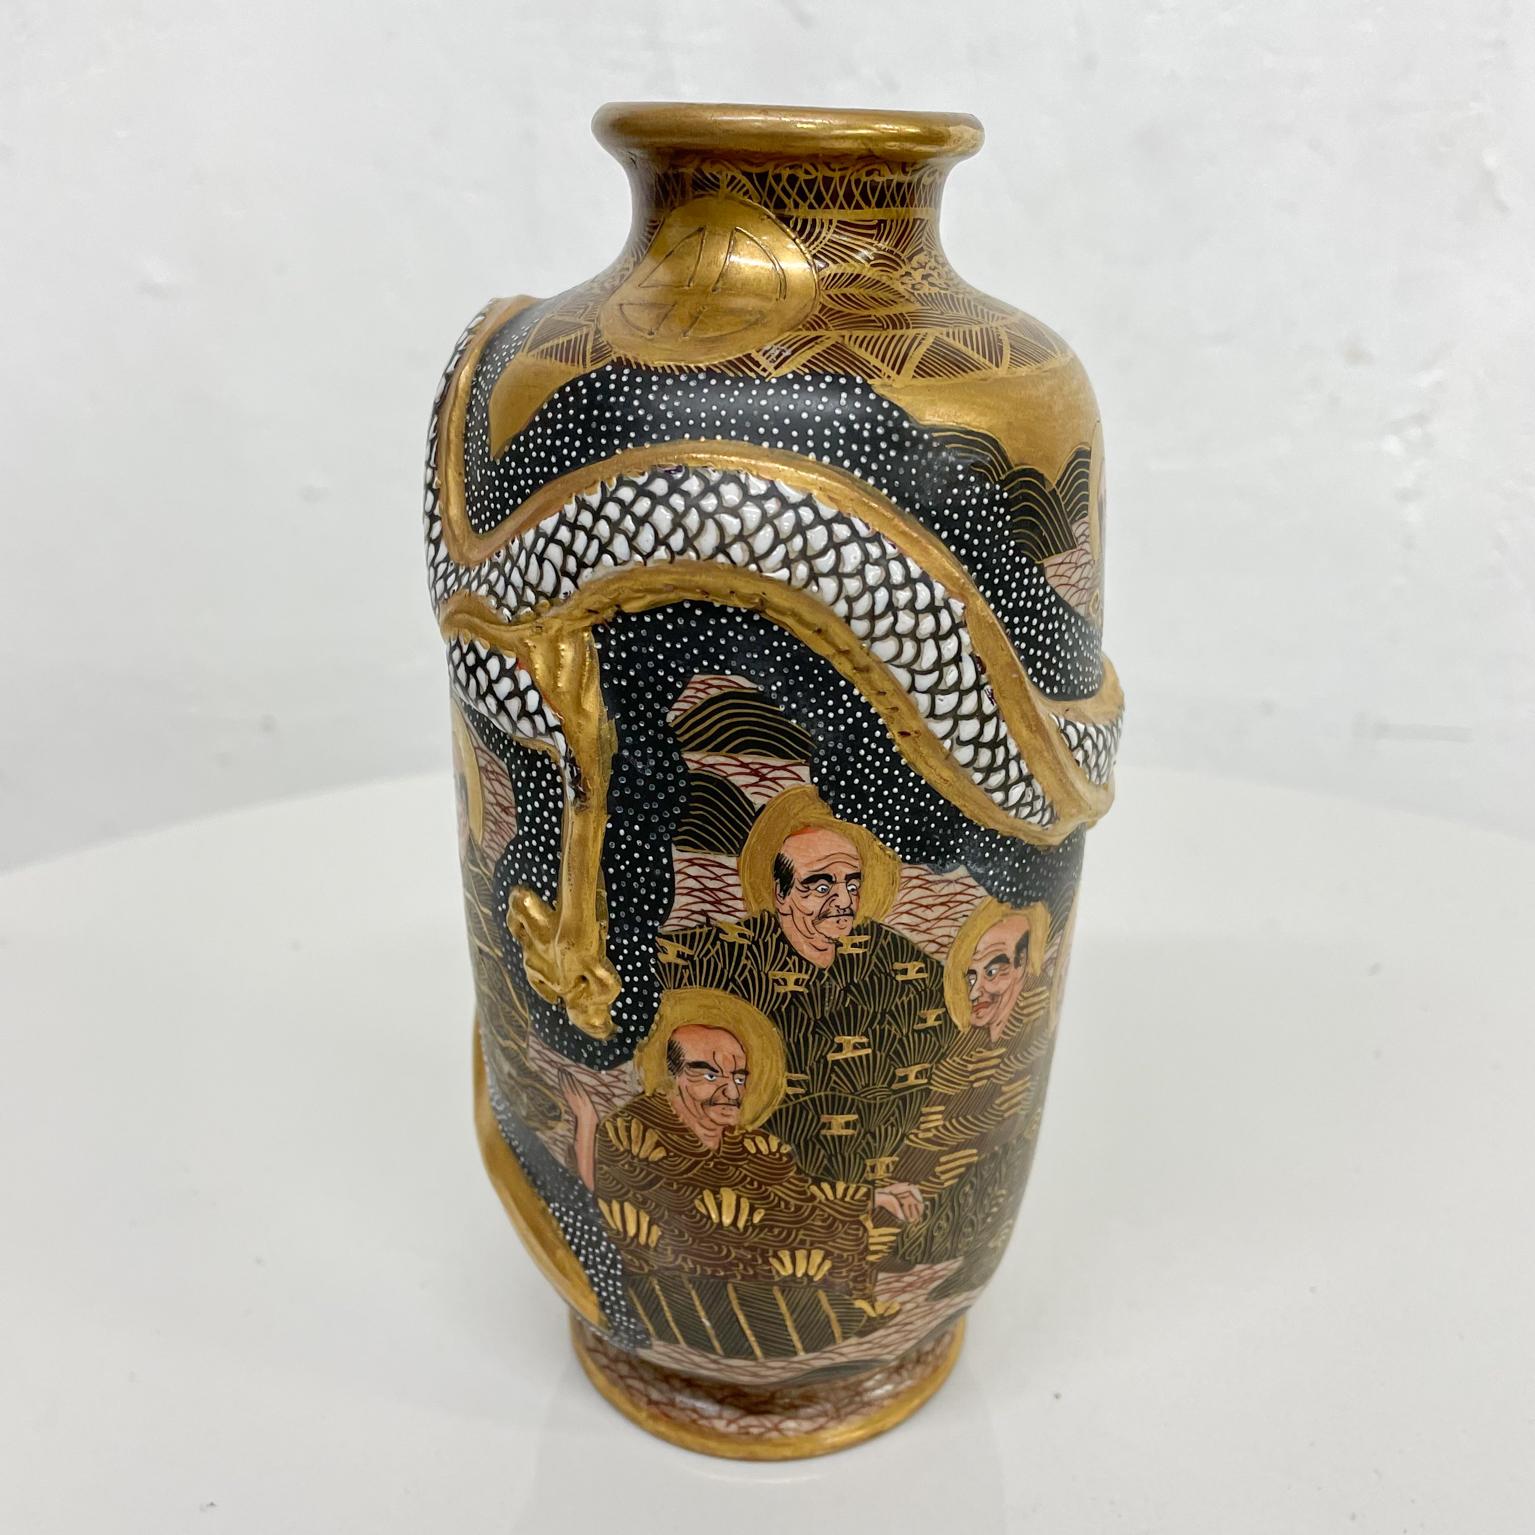 Satsuma vase
Lovely Japanese Satsuma pottery vase Arhat figures
Back gold and white with gilded decoration
Stamped at bottom
Measures: 7.25 tall x 3.5 diameter
Preowned original unrestored vintage condition
Refer to images.



